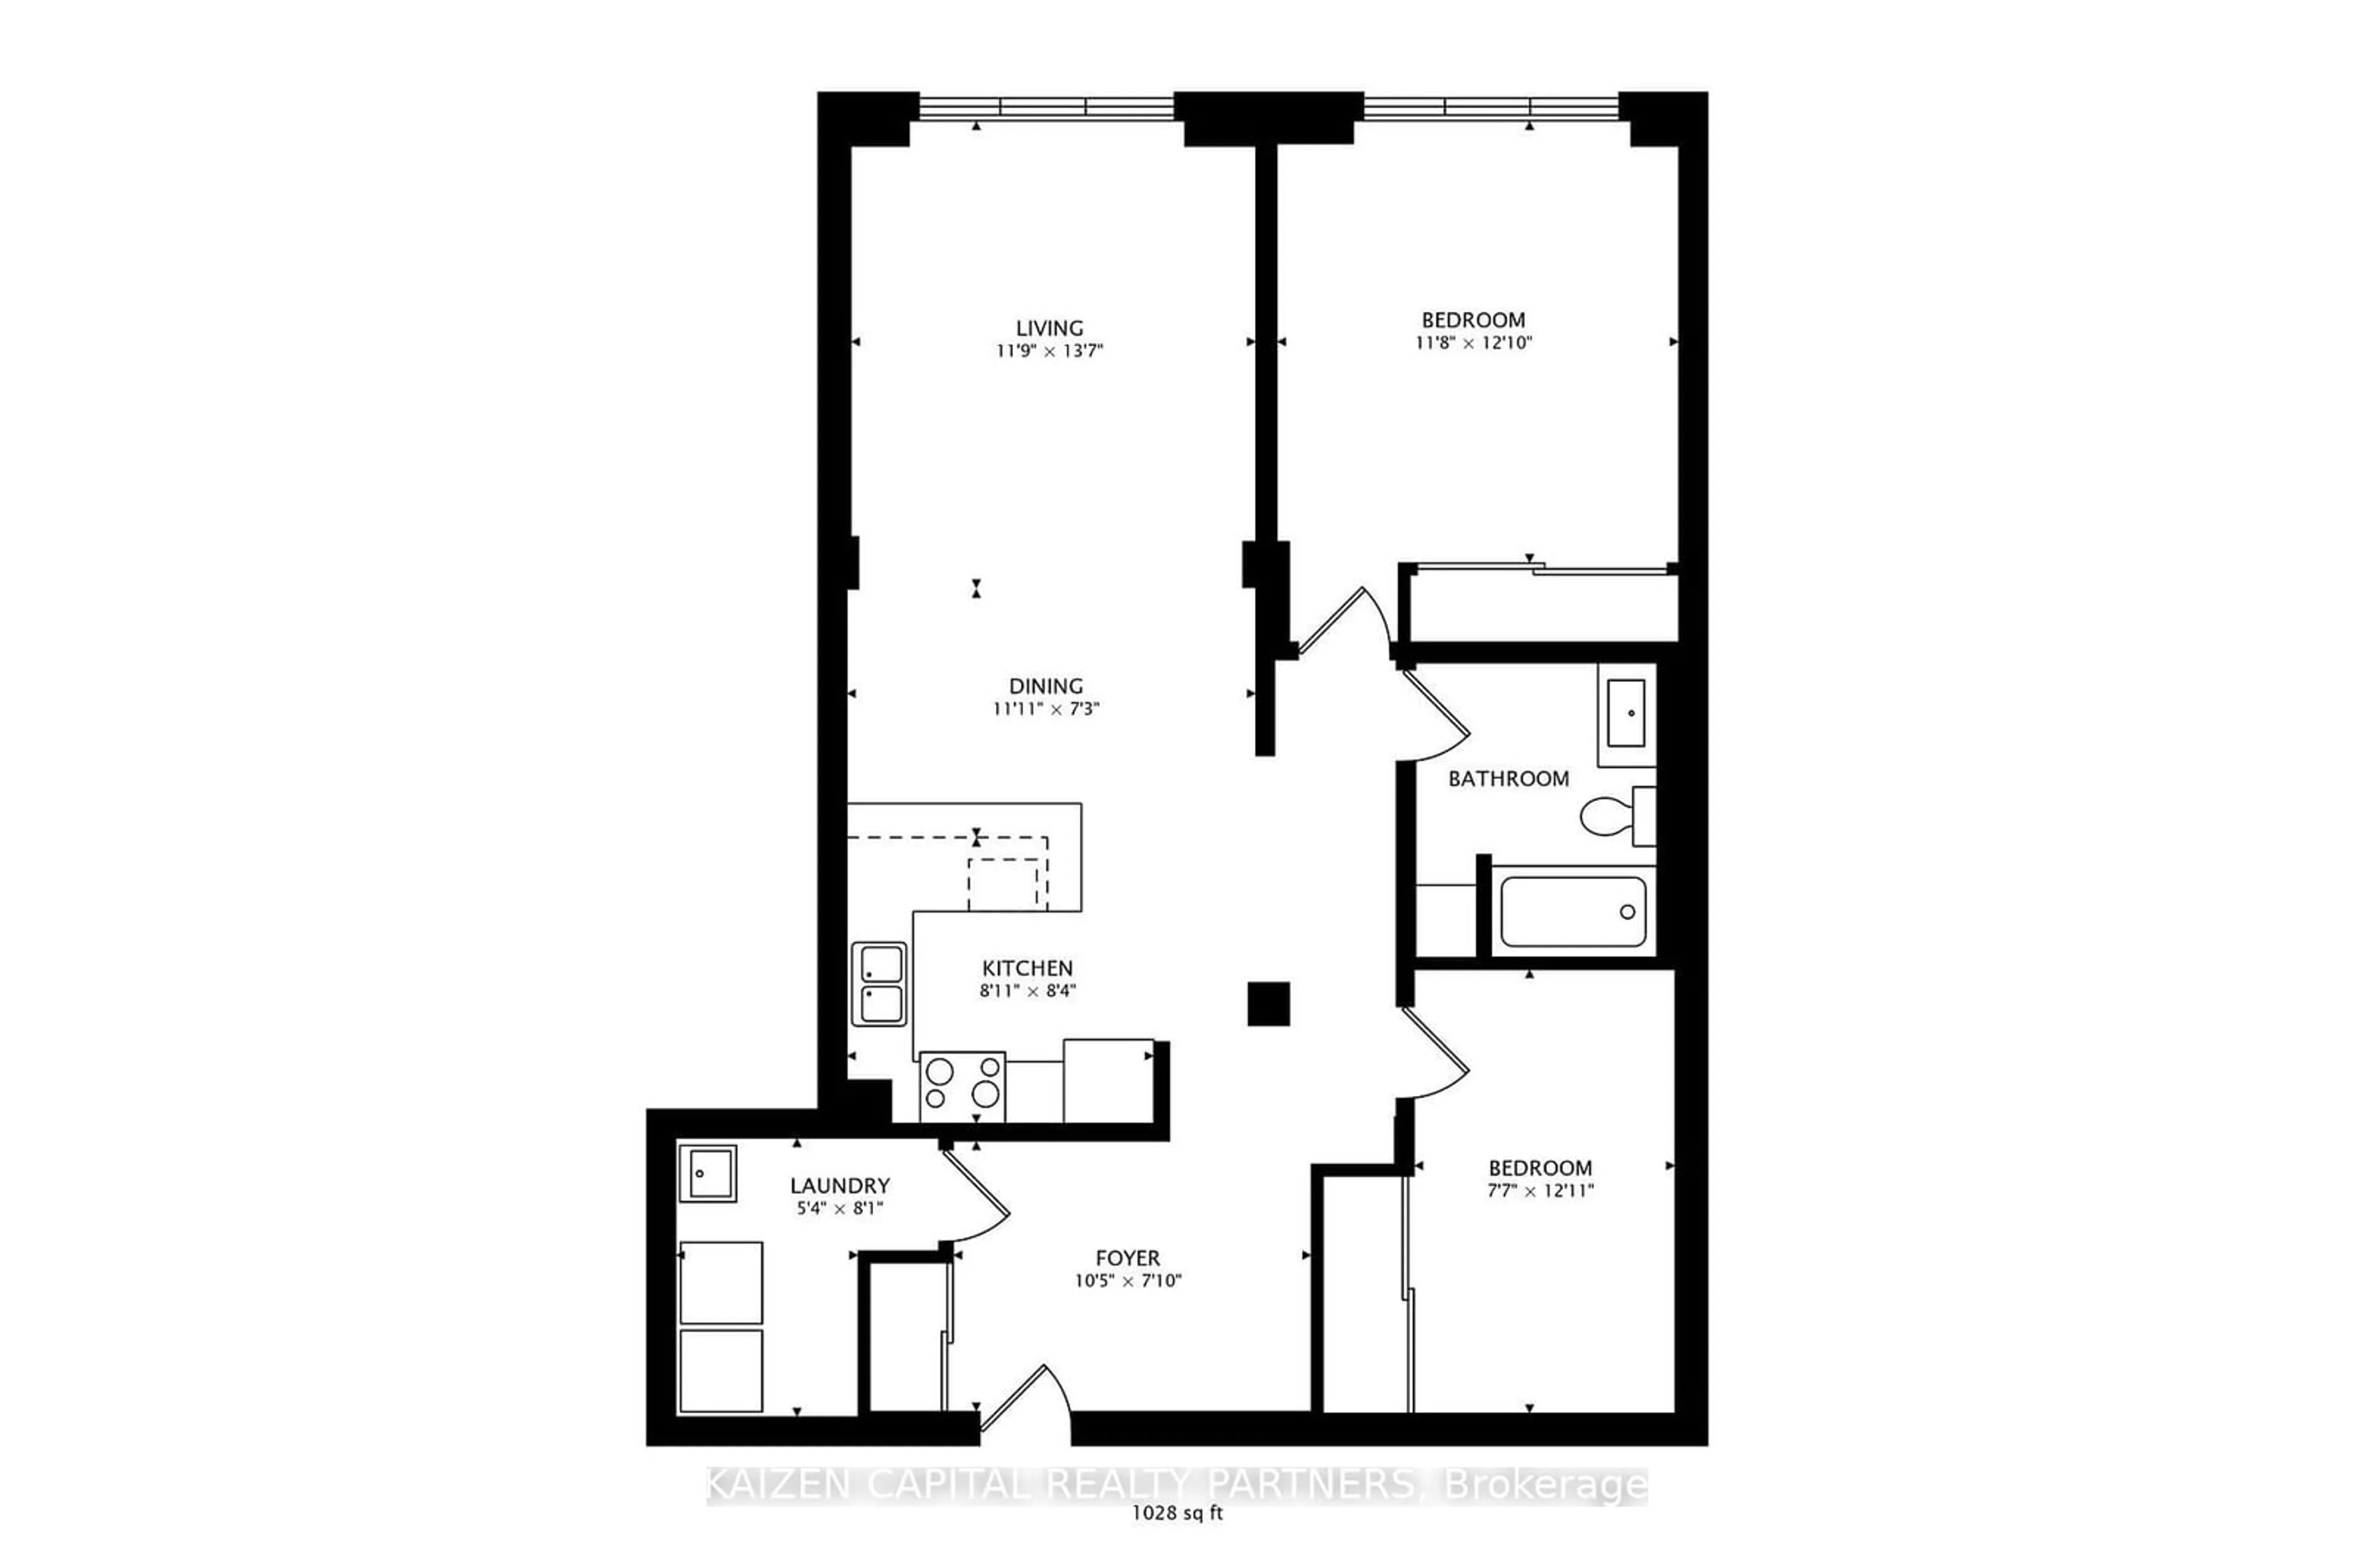 Floor plan for 90 Sherbourne St #103, Toronto Ontario M5A 2R1